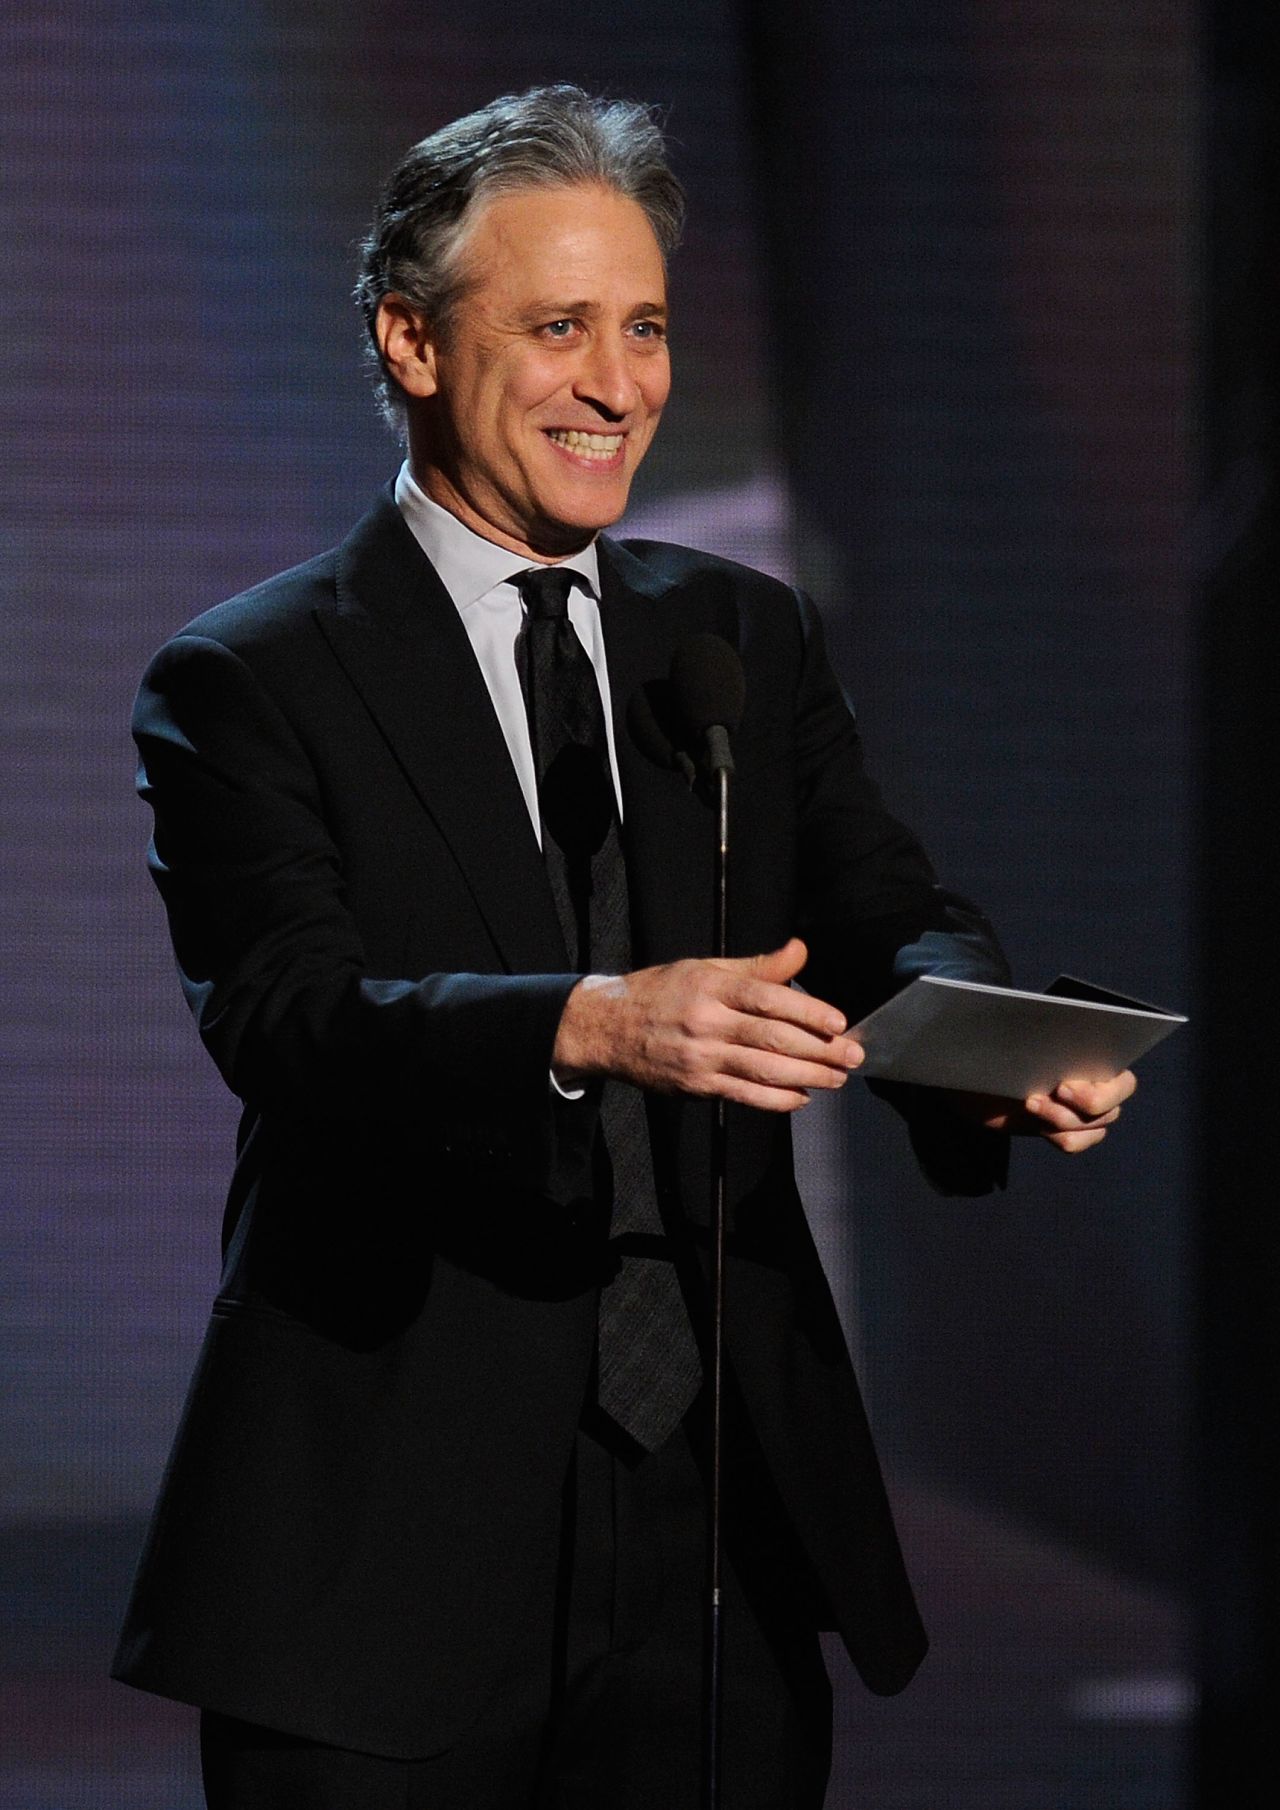 We know he probably won't do it, but Stewart would a great choice to return as an Oscars host. He was great helming the 78th and 80th annual awards shows.